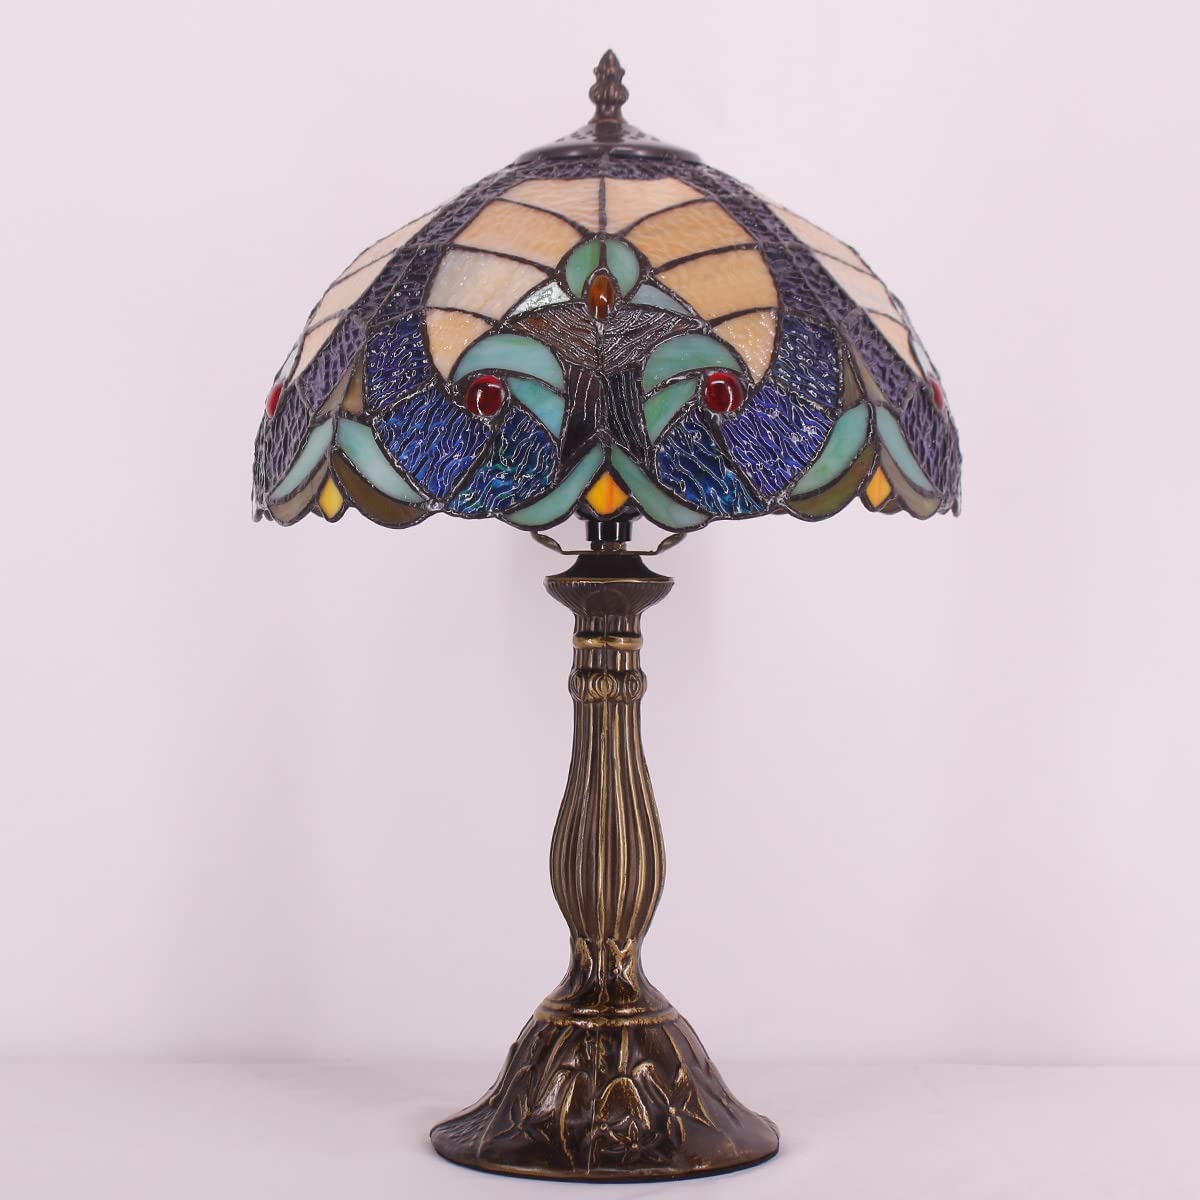 GEDUBIUBOO  Style Lamp Stained Glass Bedside Table Lamp Blue Yellow Liaison Reading Desk Light 12X12X18 Inches Decor Bedroom Living Room  Office S160E Series